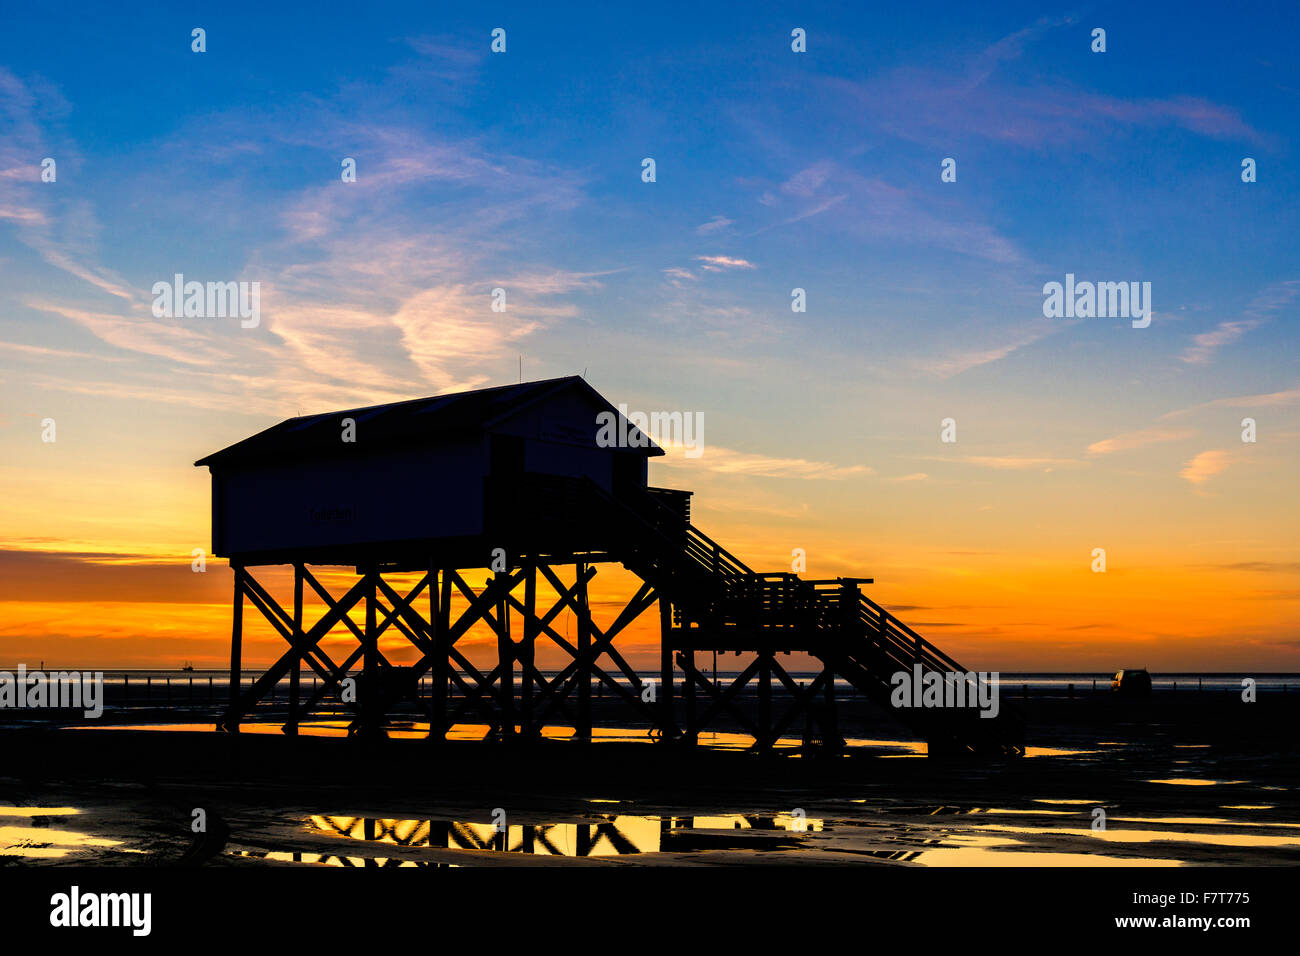 Building on stilts, at low tide, sunset, the beach of St. Peter Ording, Schleswig-Holstein, Germany Stock Photo